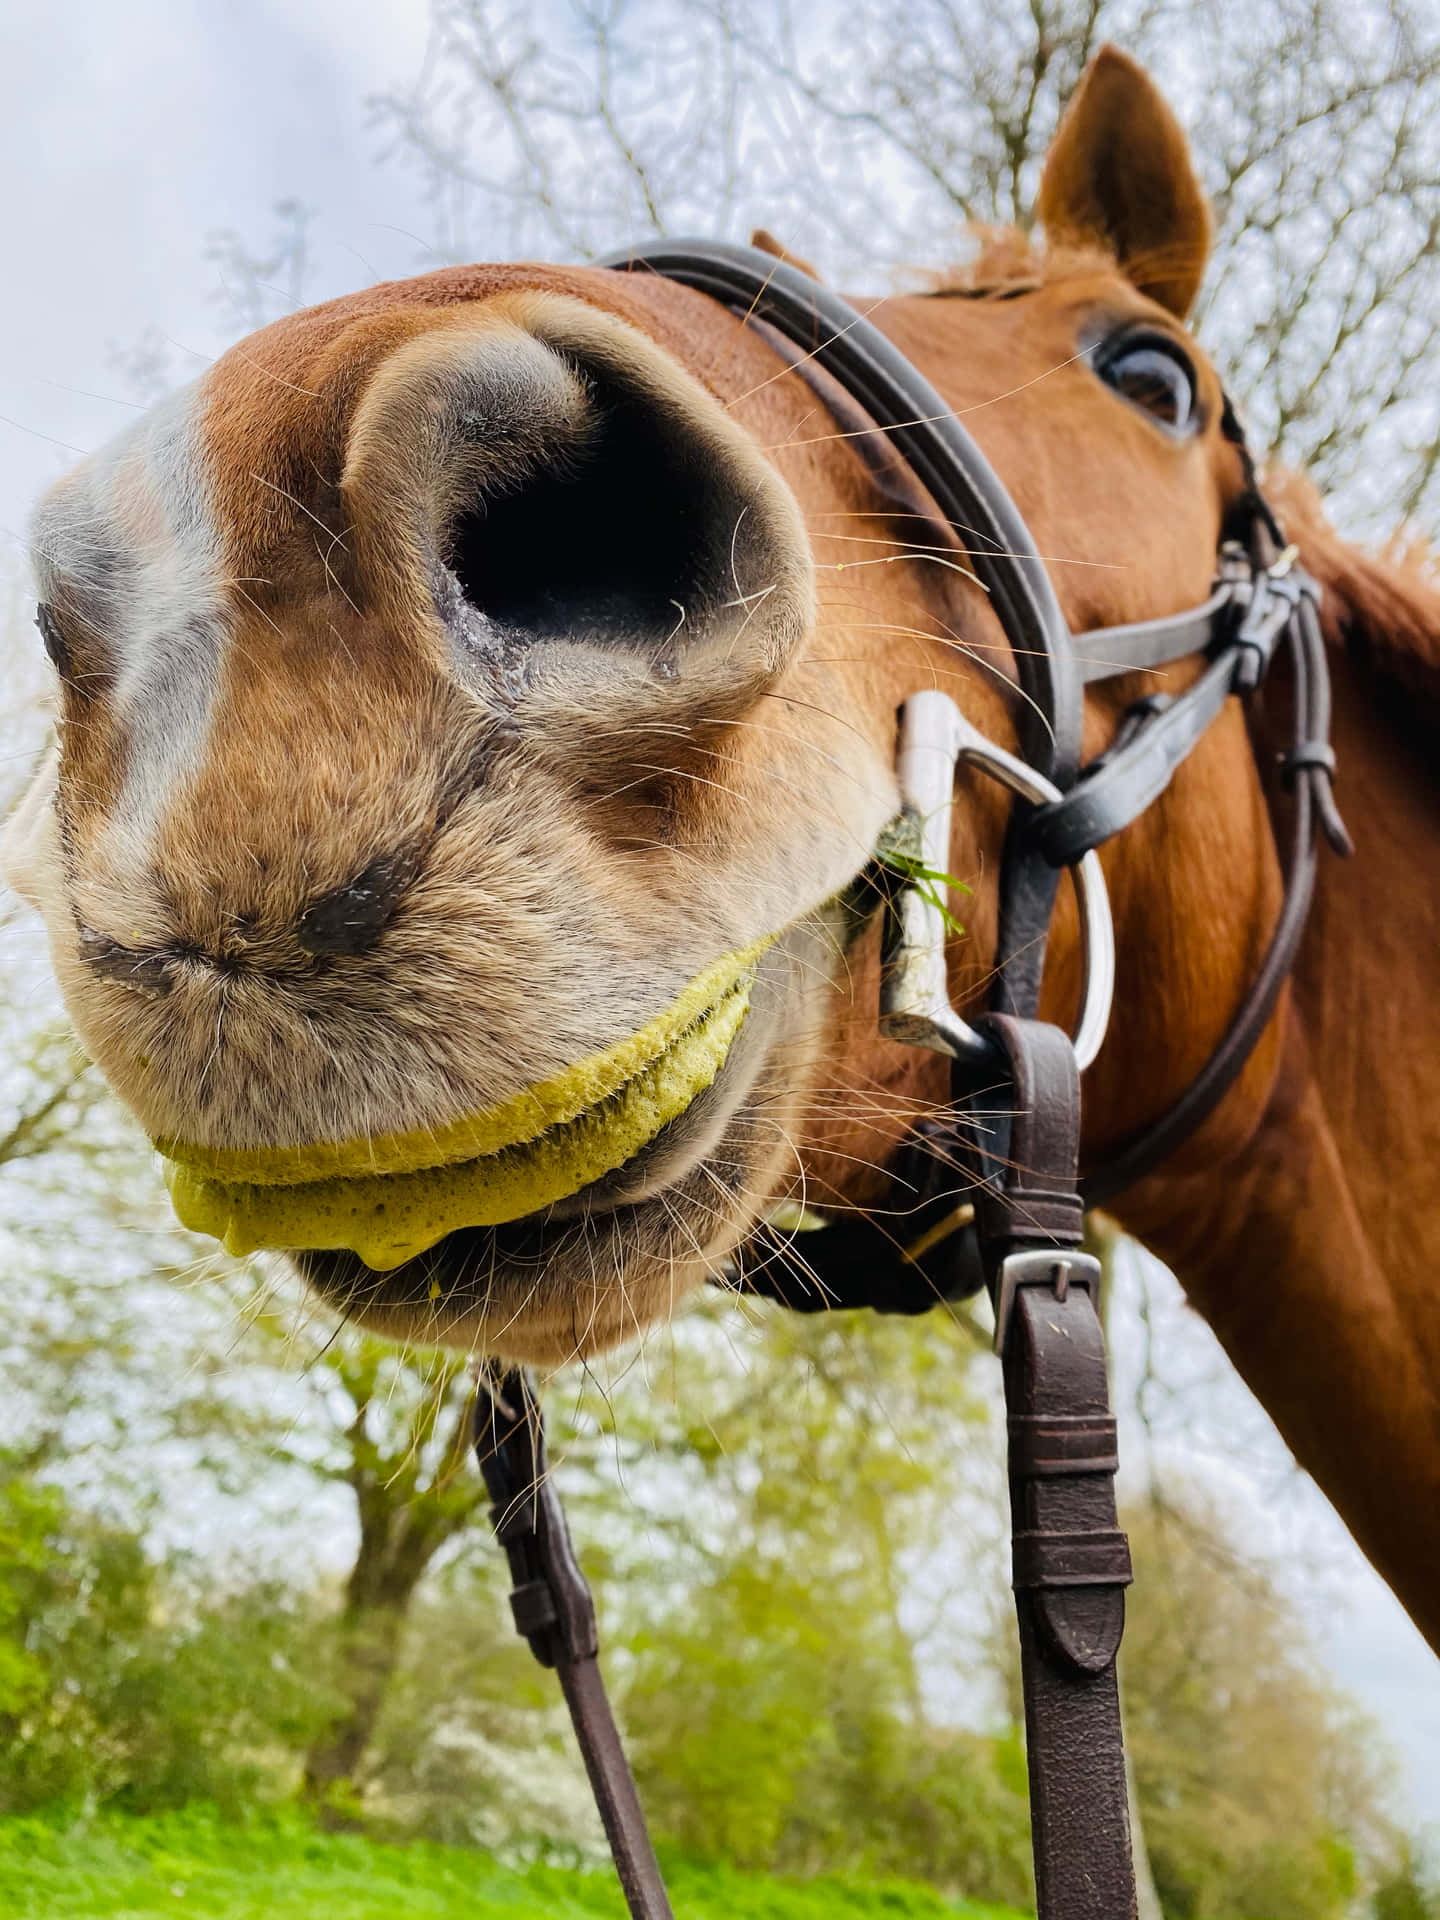 Funny Horse Close-up Pictures 3024 x 4032 Picture